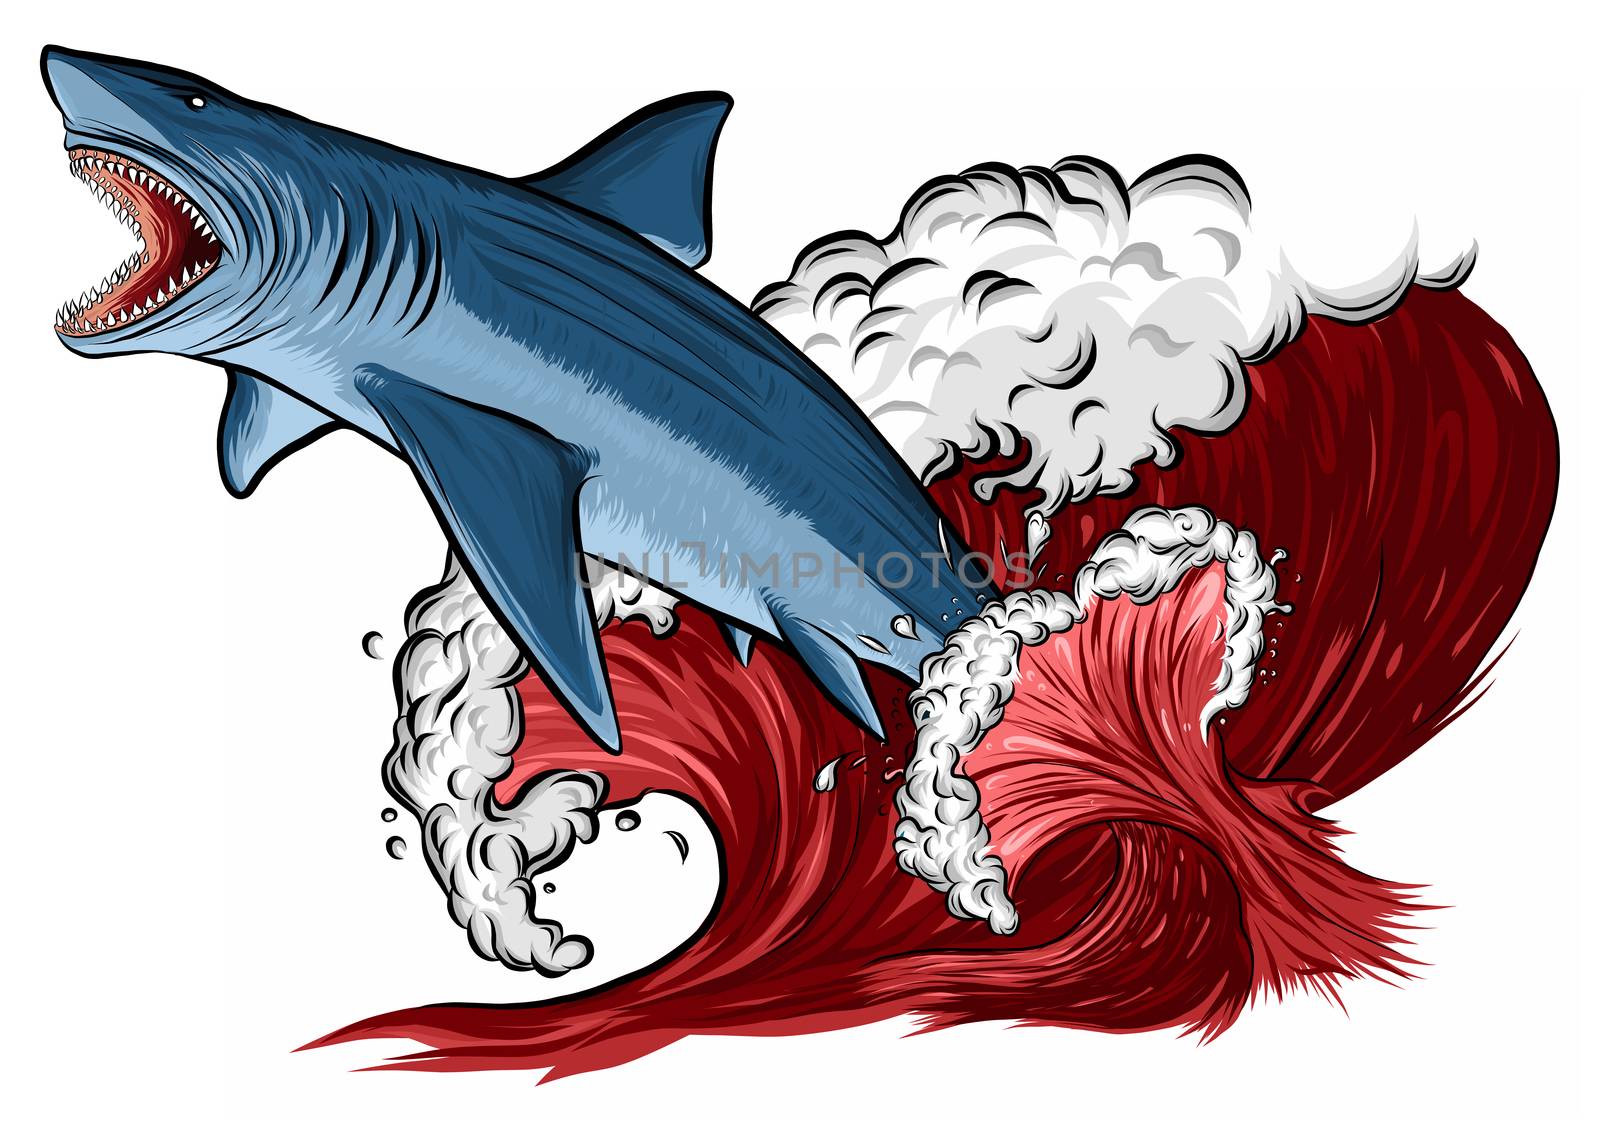 Shark with open mouth in the sea. Flat illustration by dean